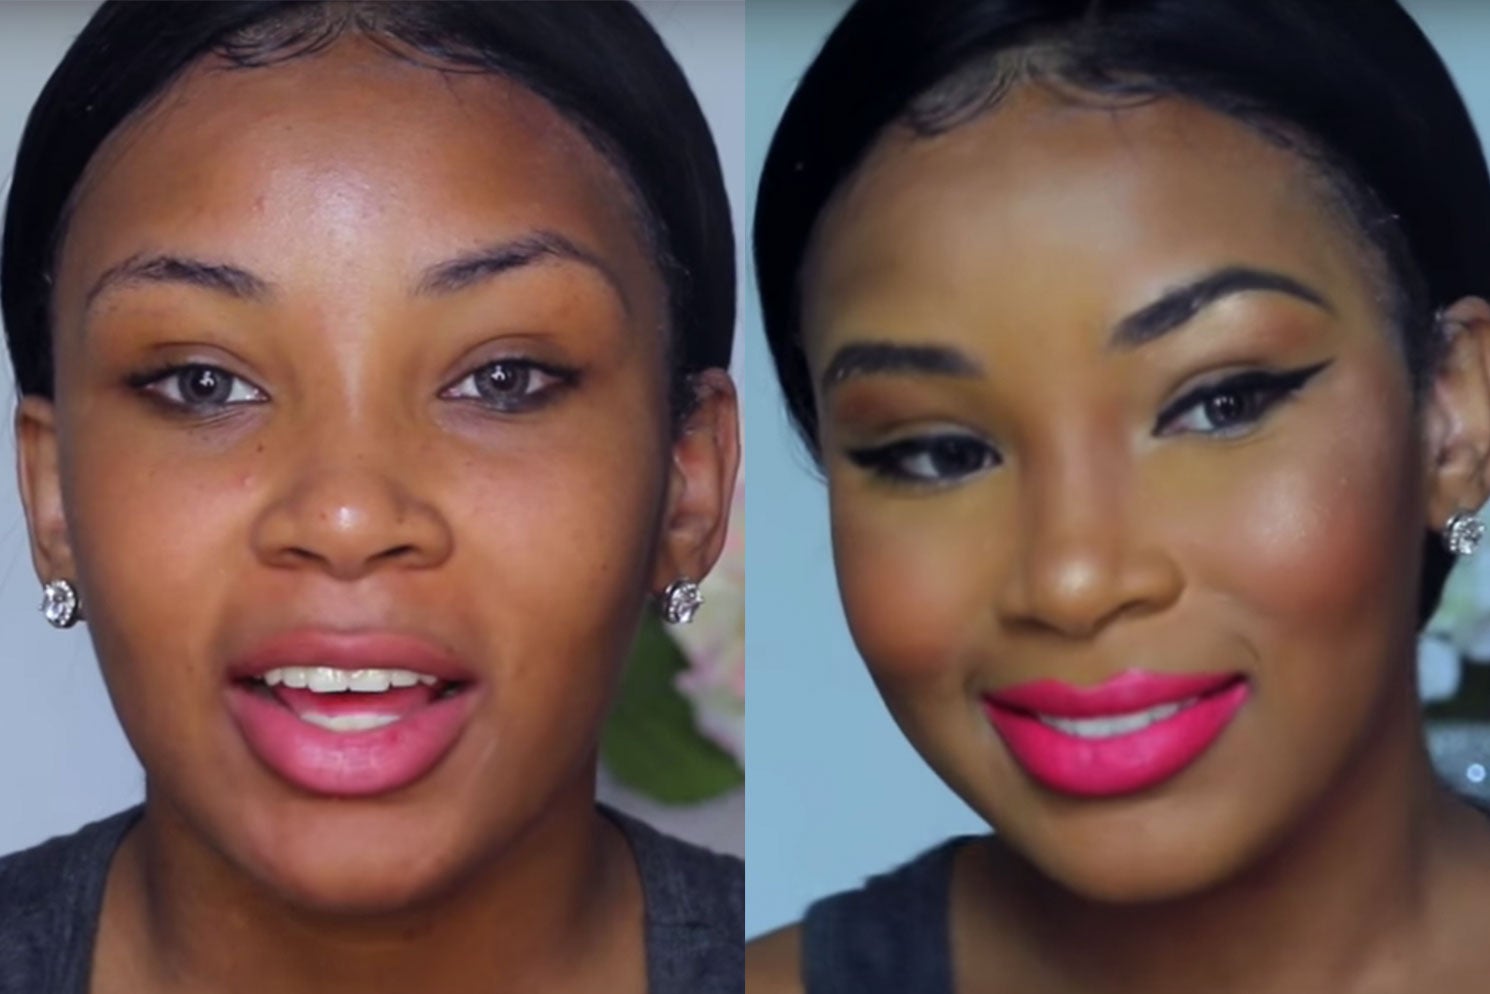 Watch This Beauty Vlogger Create a Full Look With Just Her Fingers
